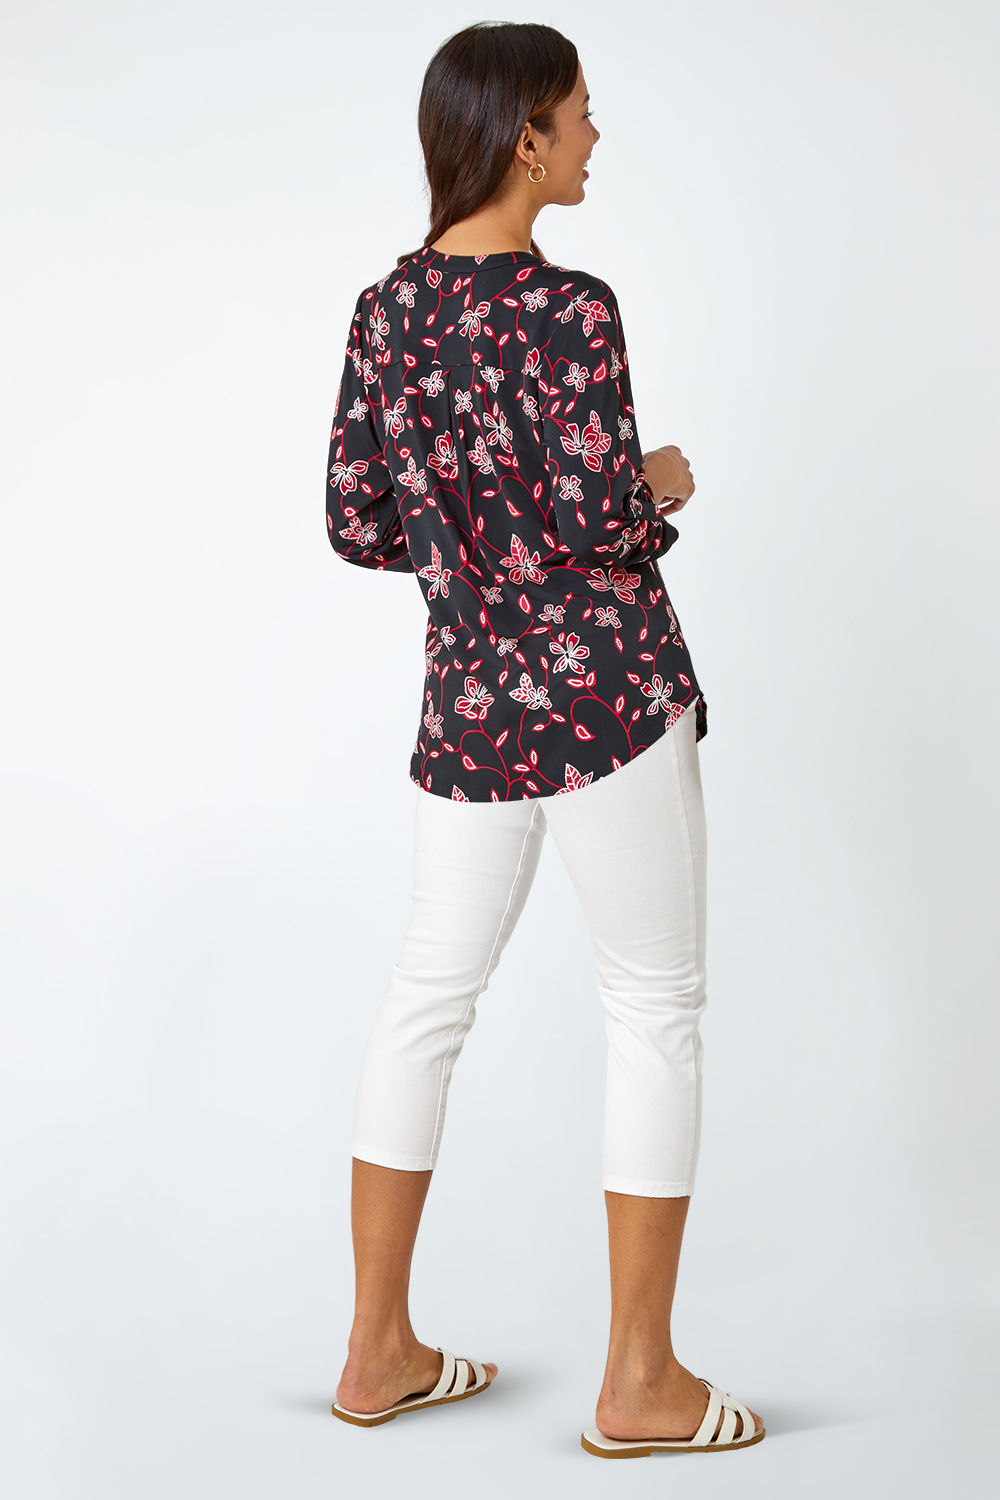 Red Textured Floral Stretch Jersey Shirt, Image 3 of 5